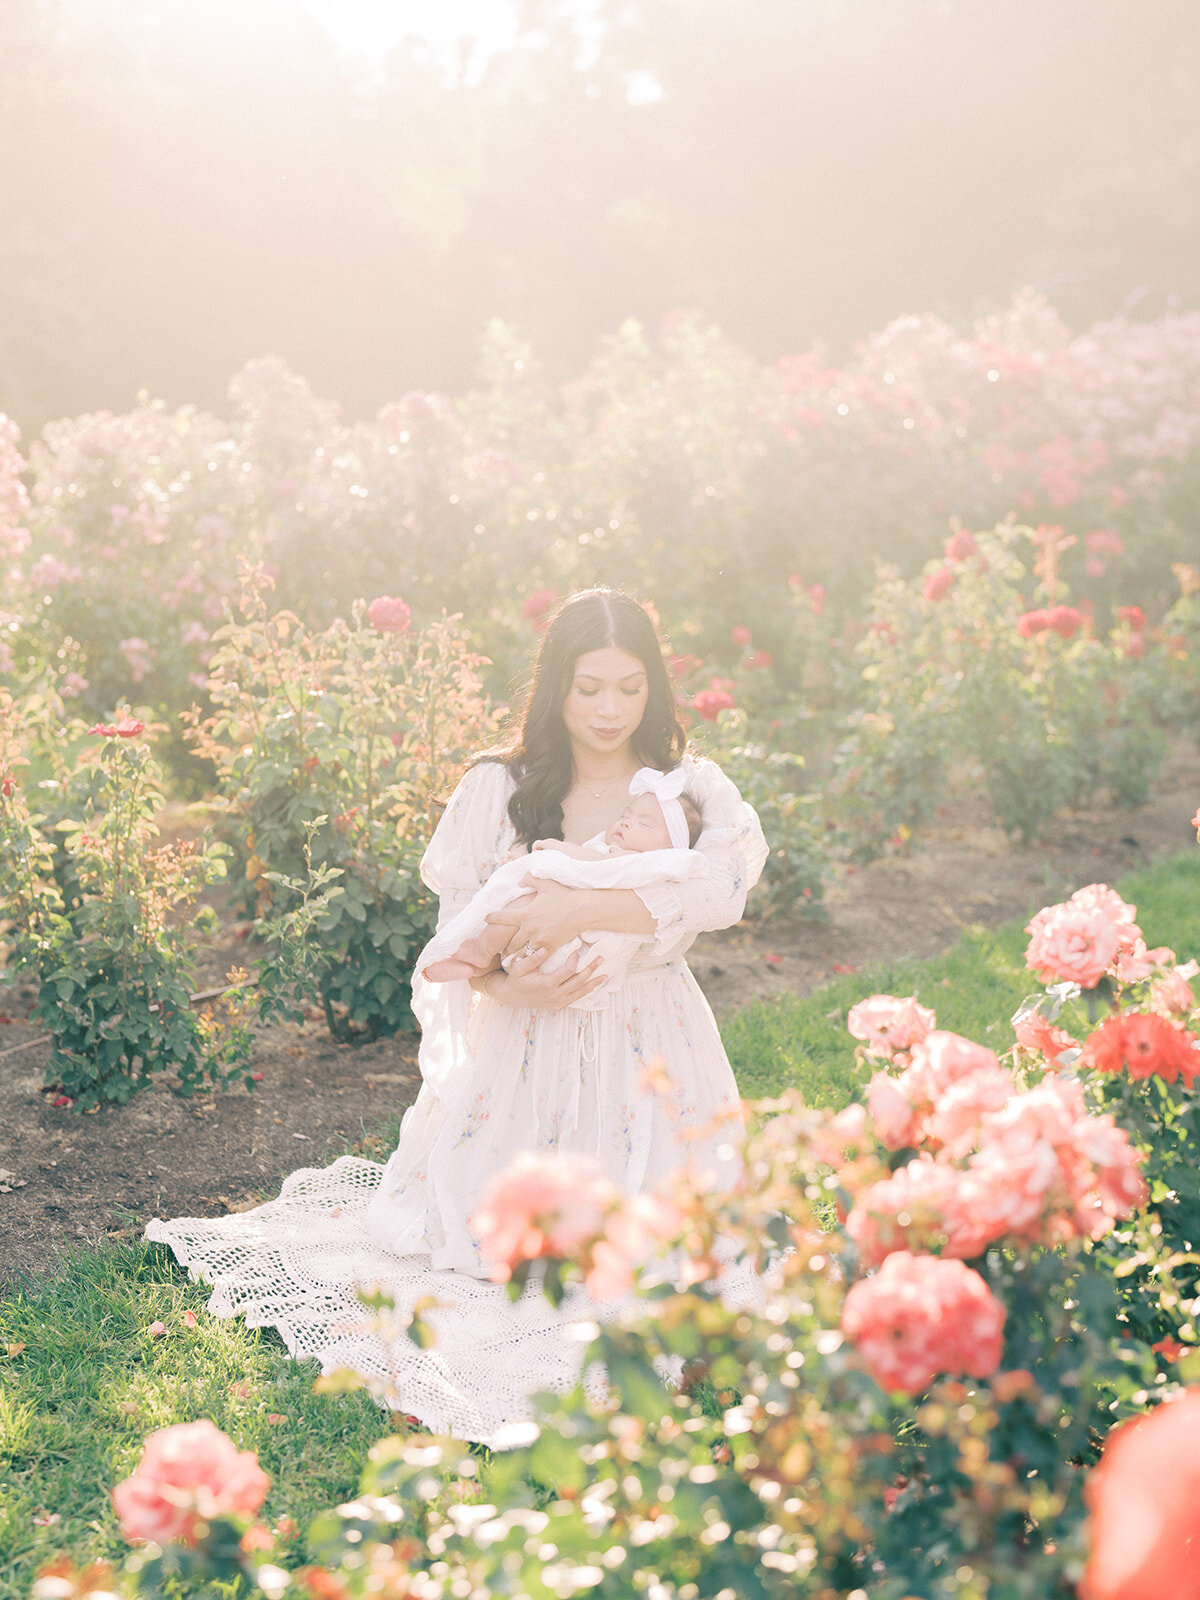 Mother sits on a blanket in a rose garden while holding her baby girl at sunset.